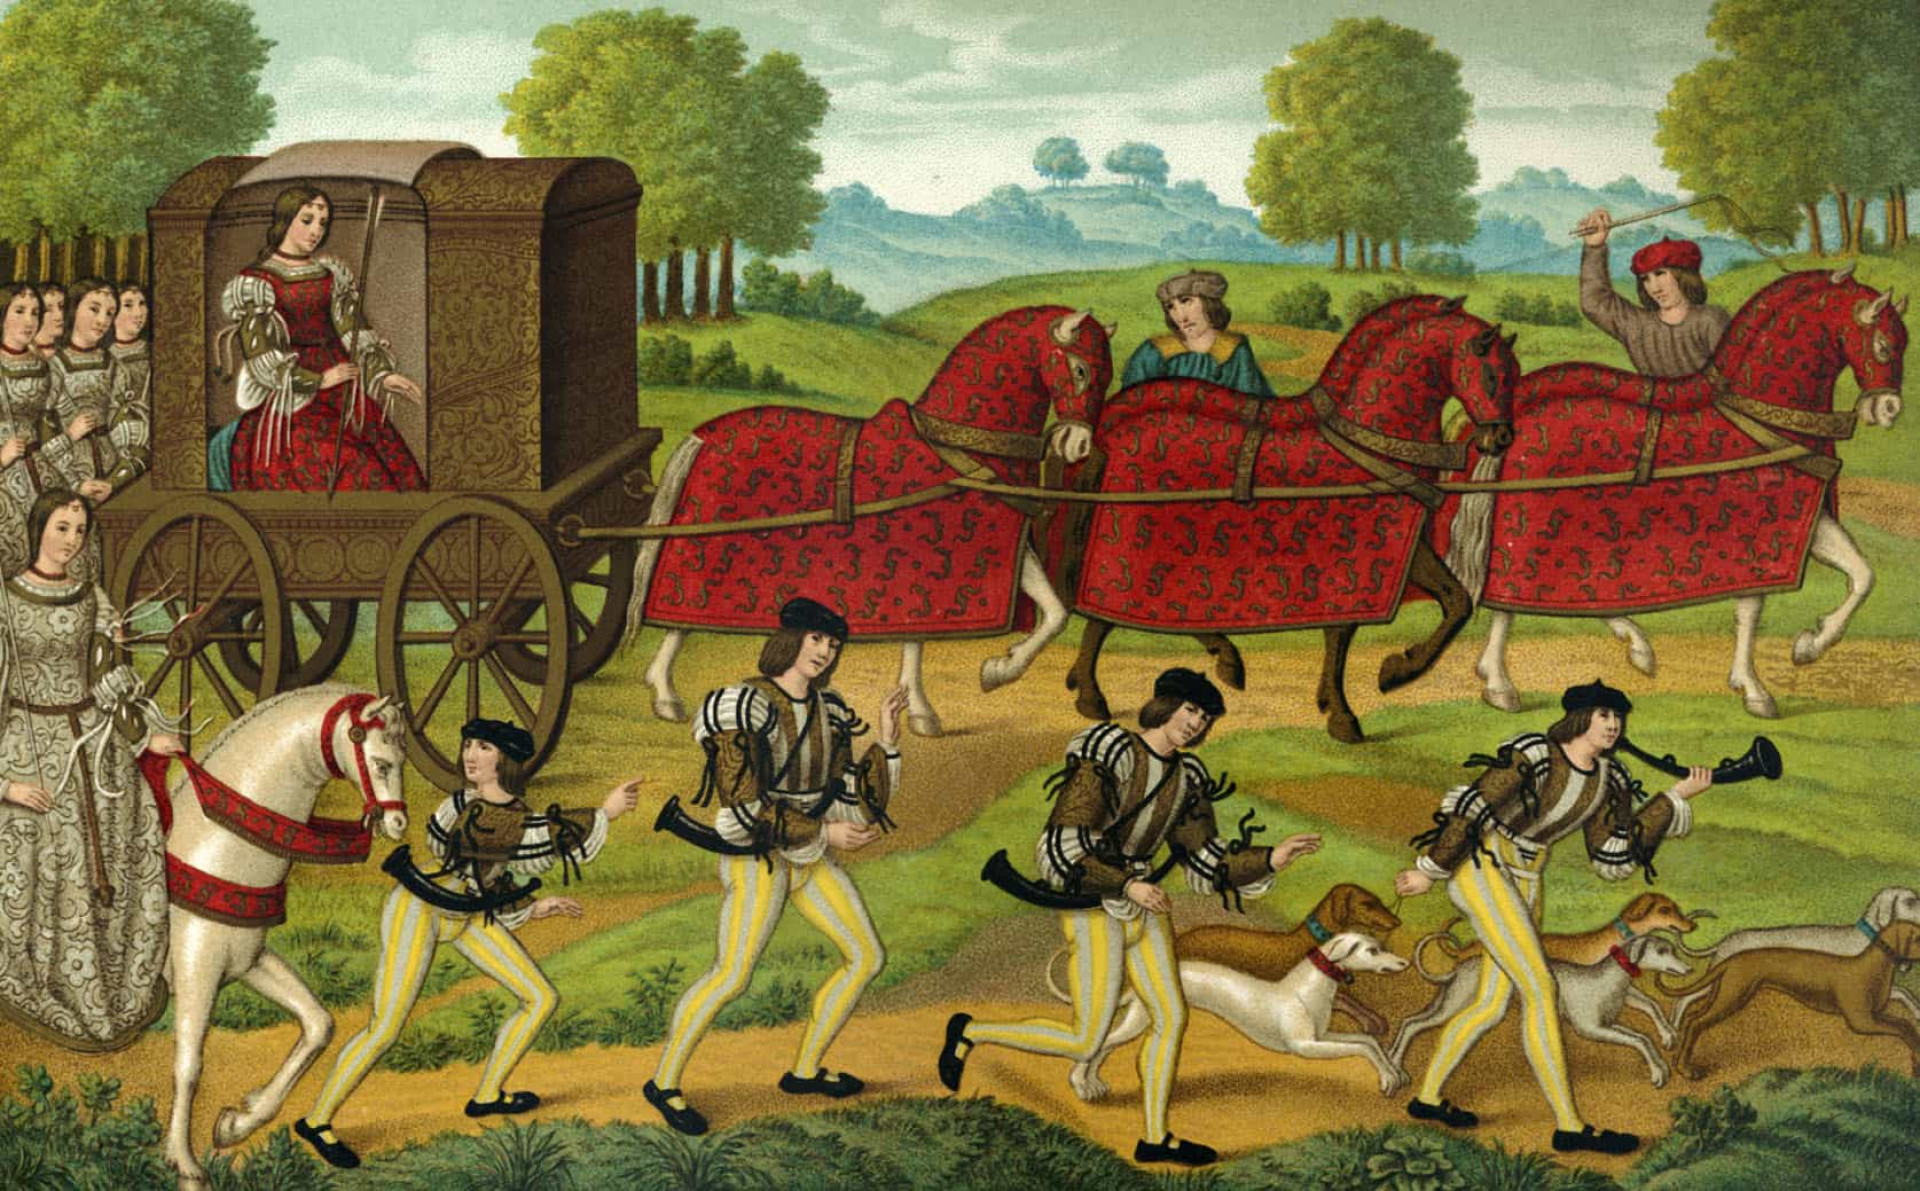 <p>For the nobility, carriages had other applications besides being used as a mode of transport. This illustration depicts a ladies' hunting party in the 14th century. Three horses draw a carriage accompanied by several pages and a group of hunting dogs.</p><p><a href="https://www.msn.com/en-us/community/channel/vid-7xx8mnucu55yw63we9va2gwr7uihbxwc68fxqp25x6tg4ftibpra?cvid=94631541bc0f4f89bfd59158d696ad7e">Follow us and access great exclusive content every day</a></p>